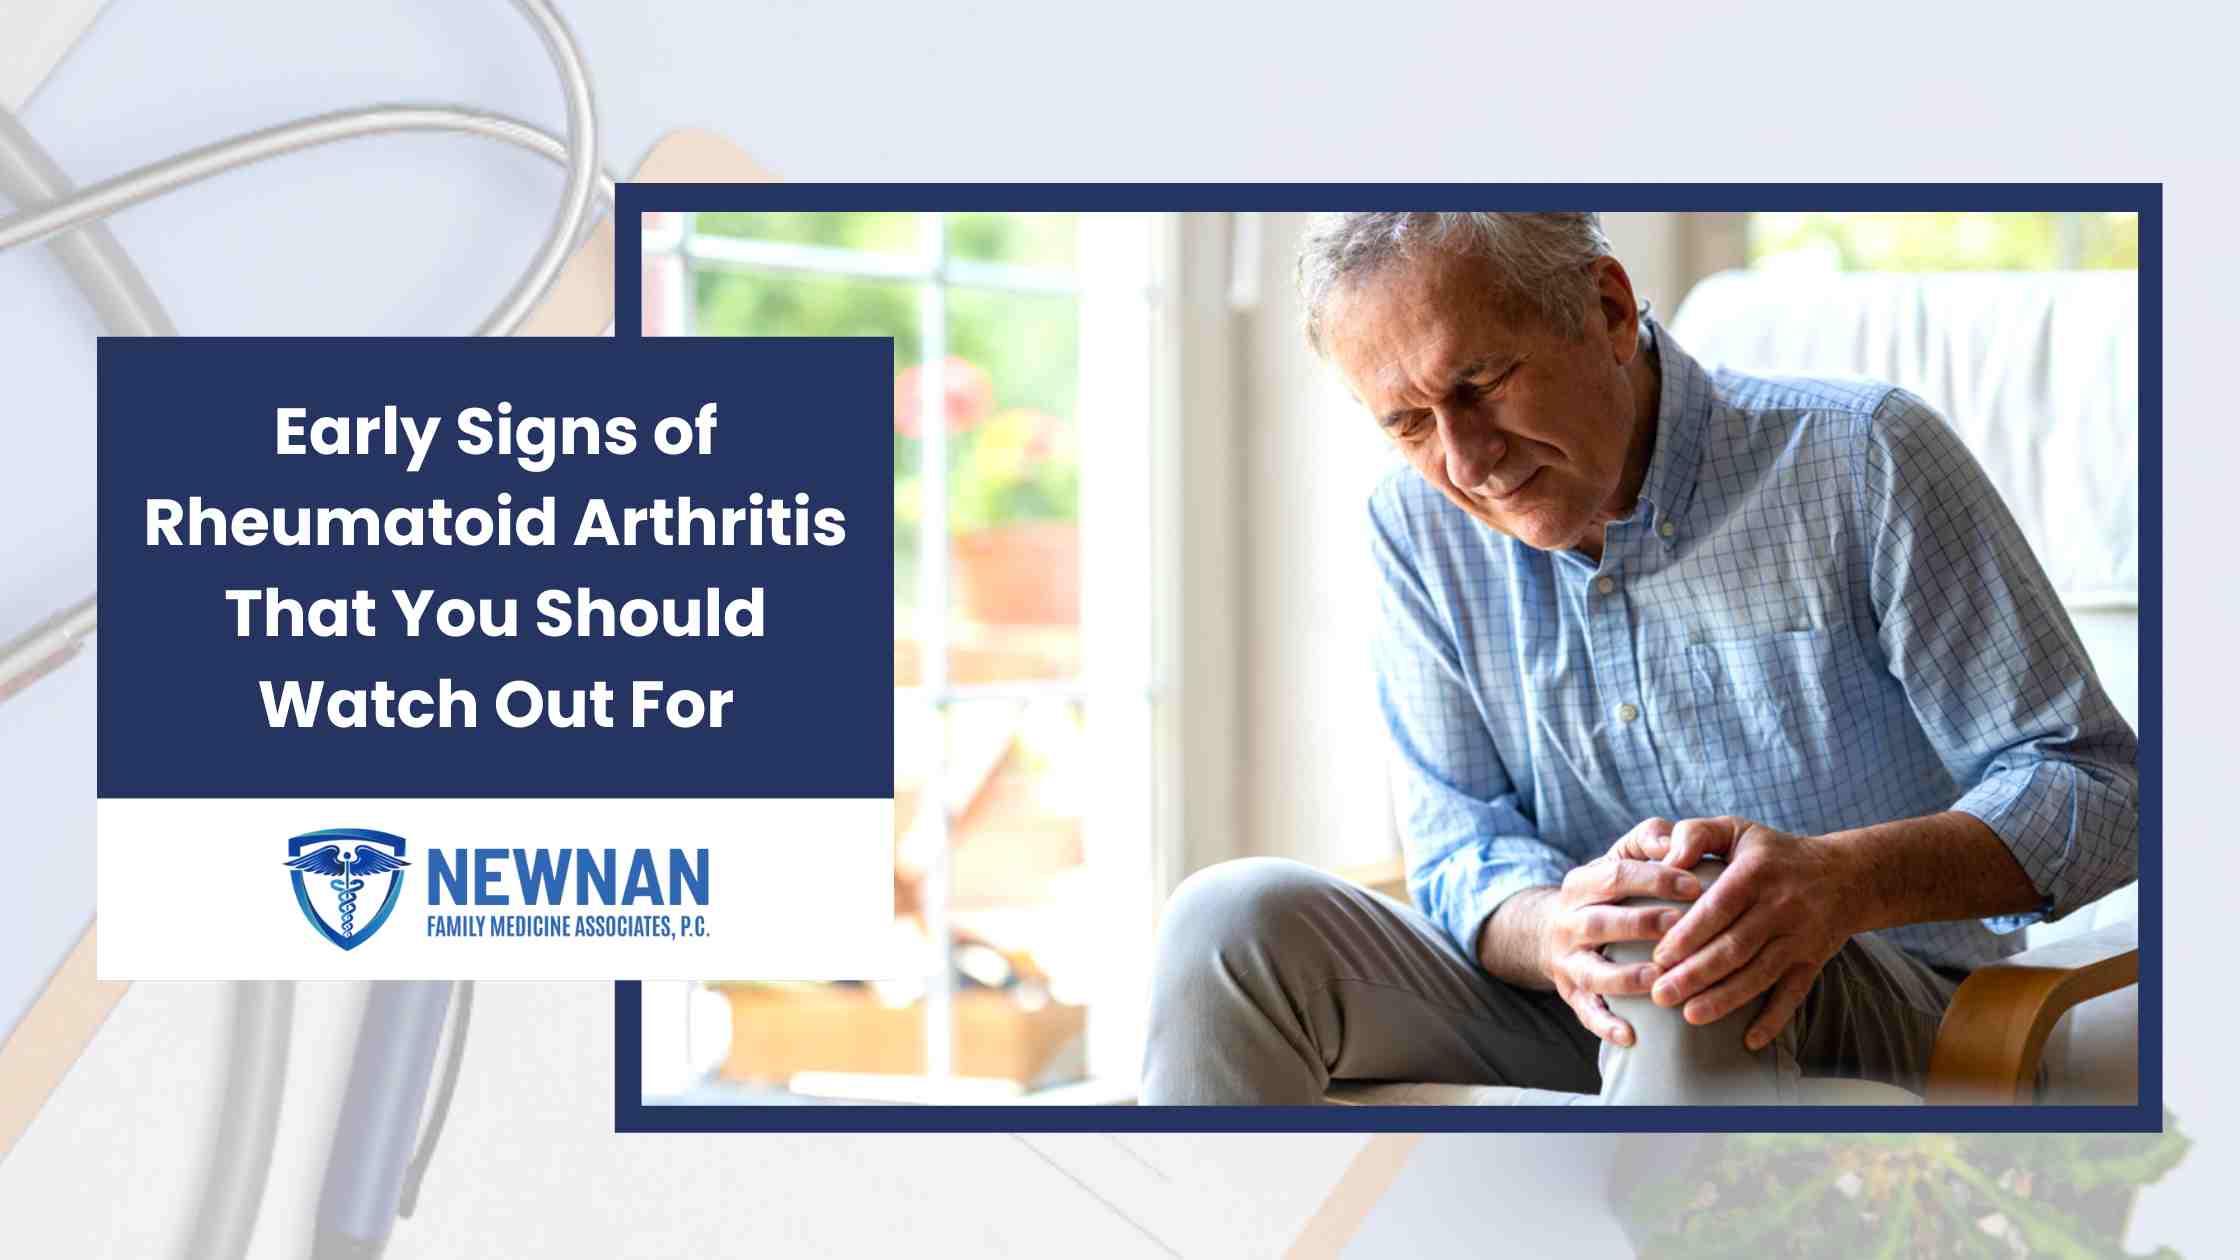 Early Signs of Rheumatoid Arthritis That You Should Watch Out For